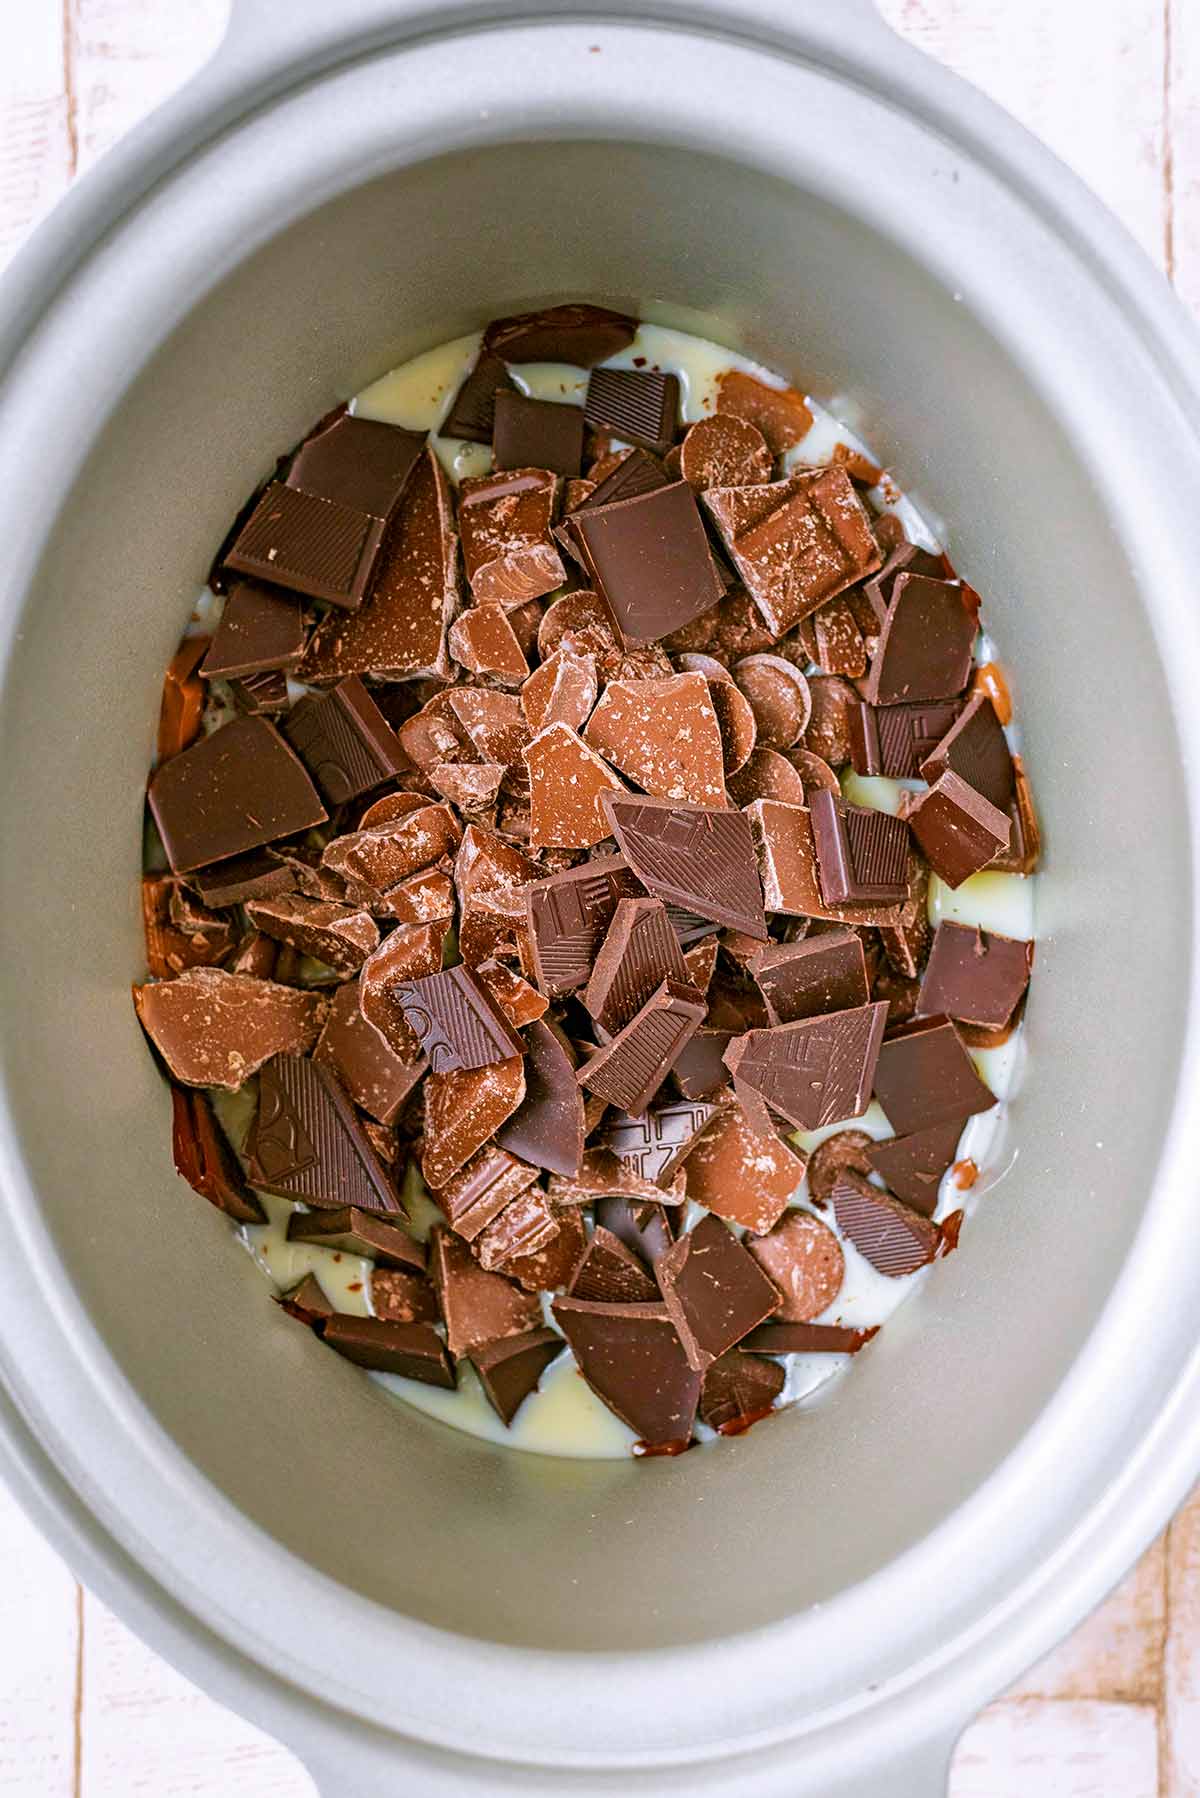 A slow cooker pot full of condensed milk and broken chocolate.